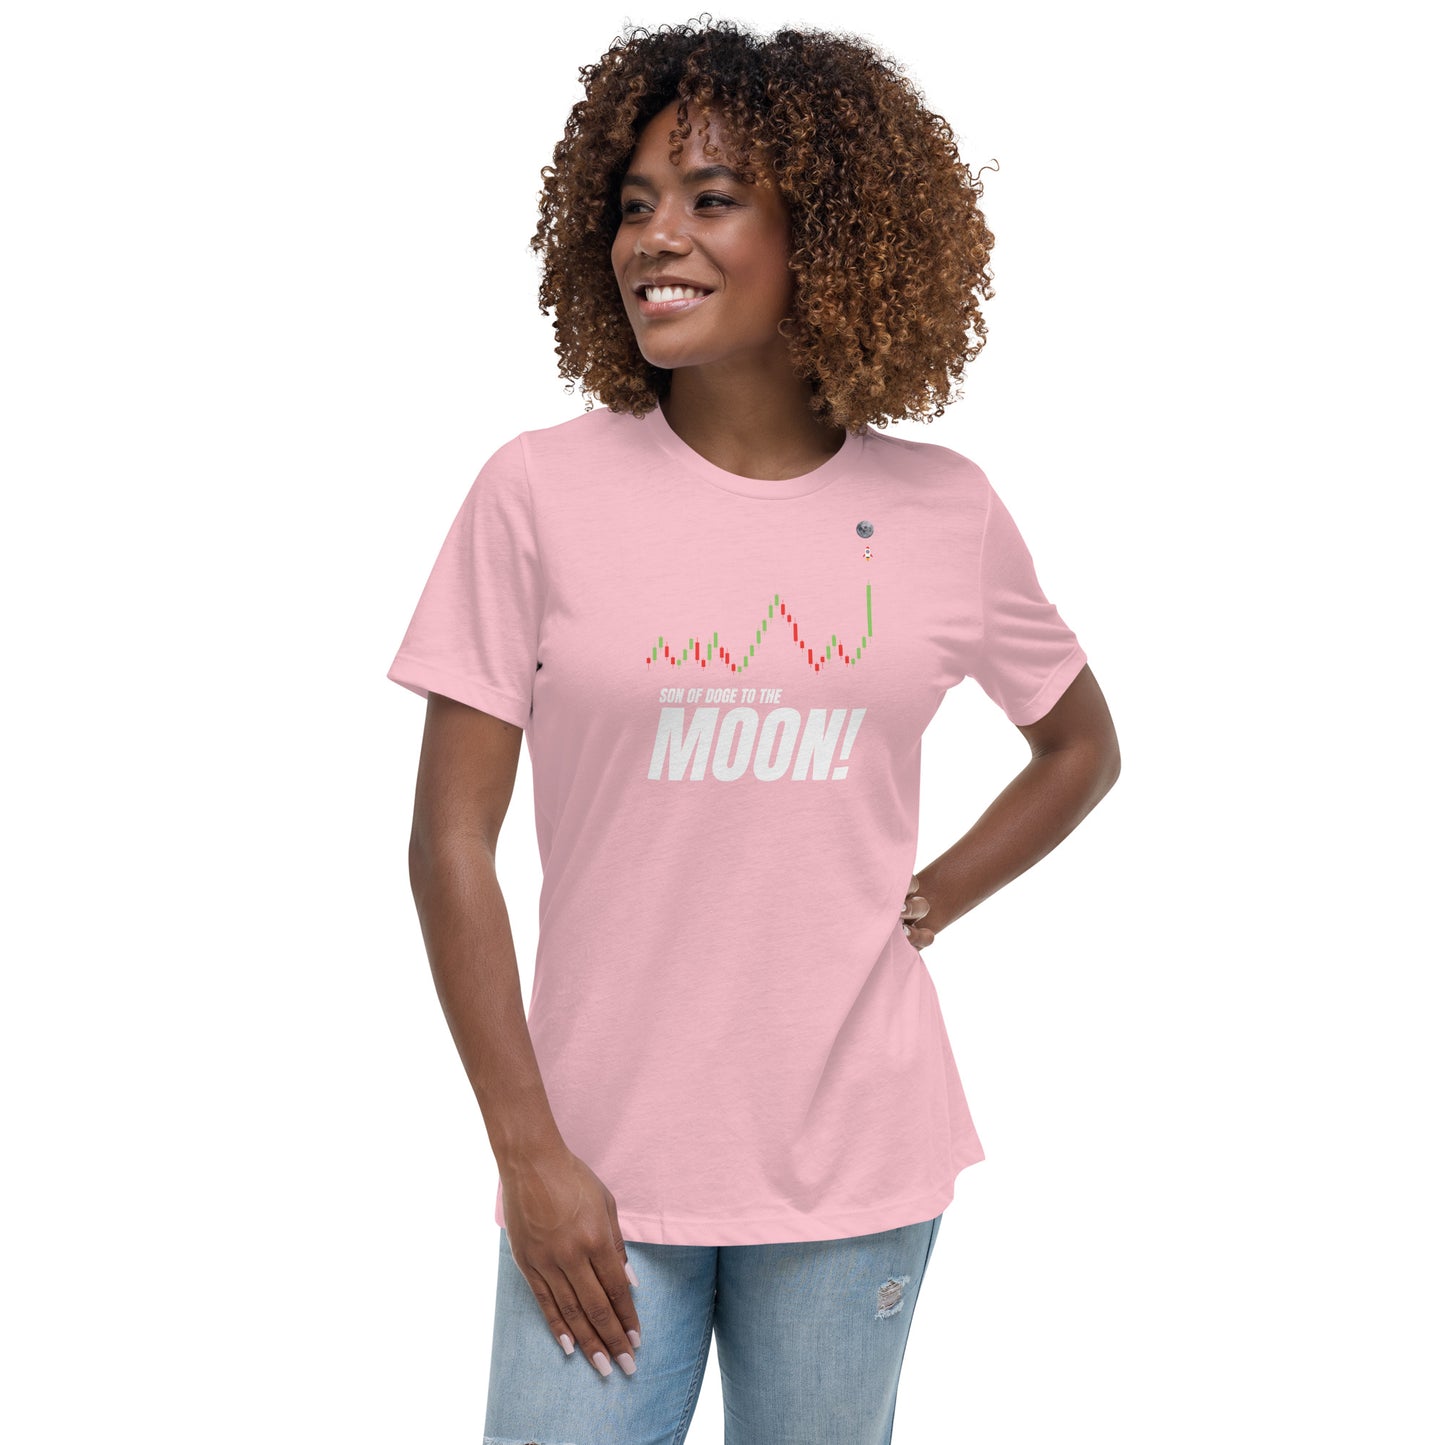 Son Of Doge 'To The Moon' Women's Relaxed T-Shirt